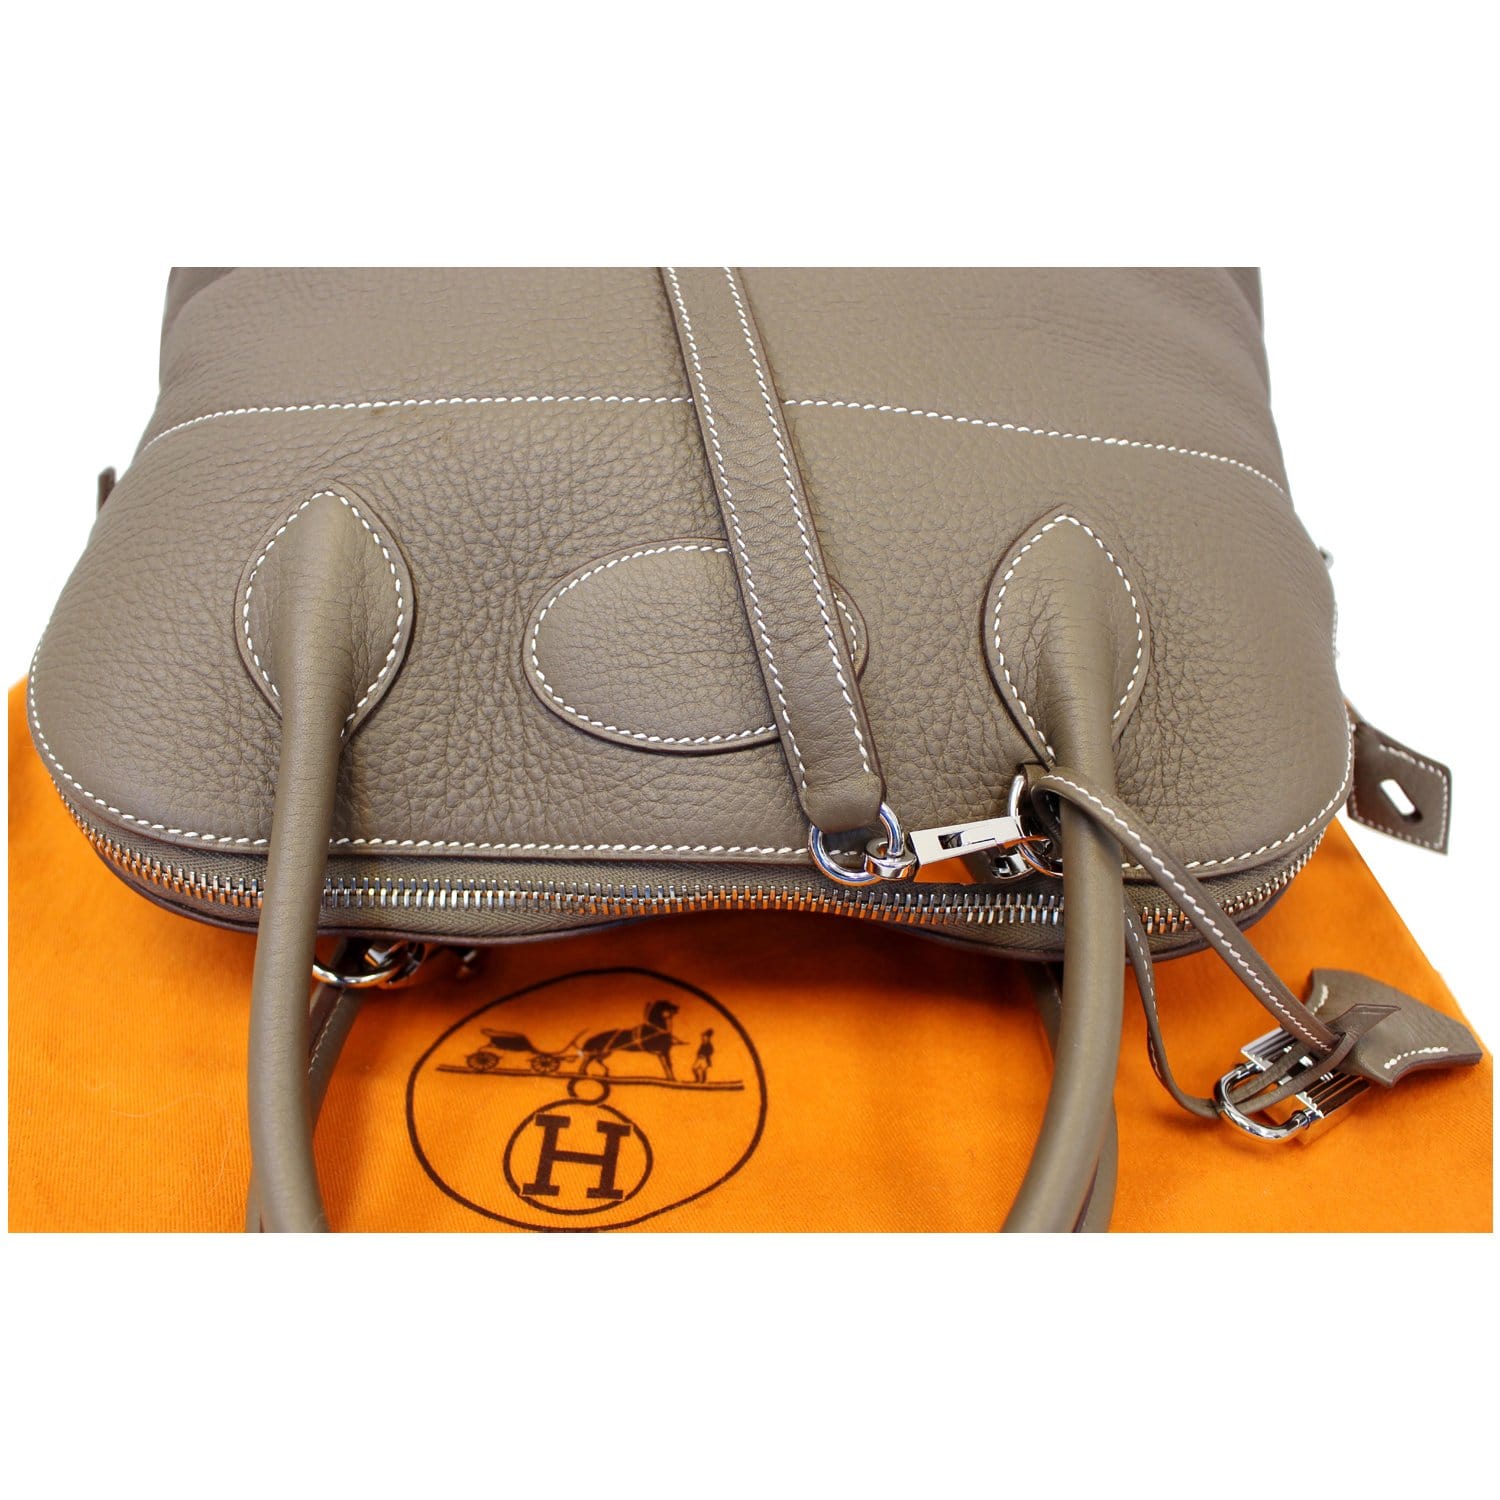 HERMÈS Bolide 31 handbag in Crevette Clemence leather with